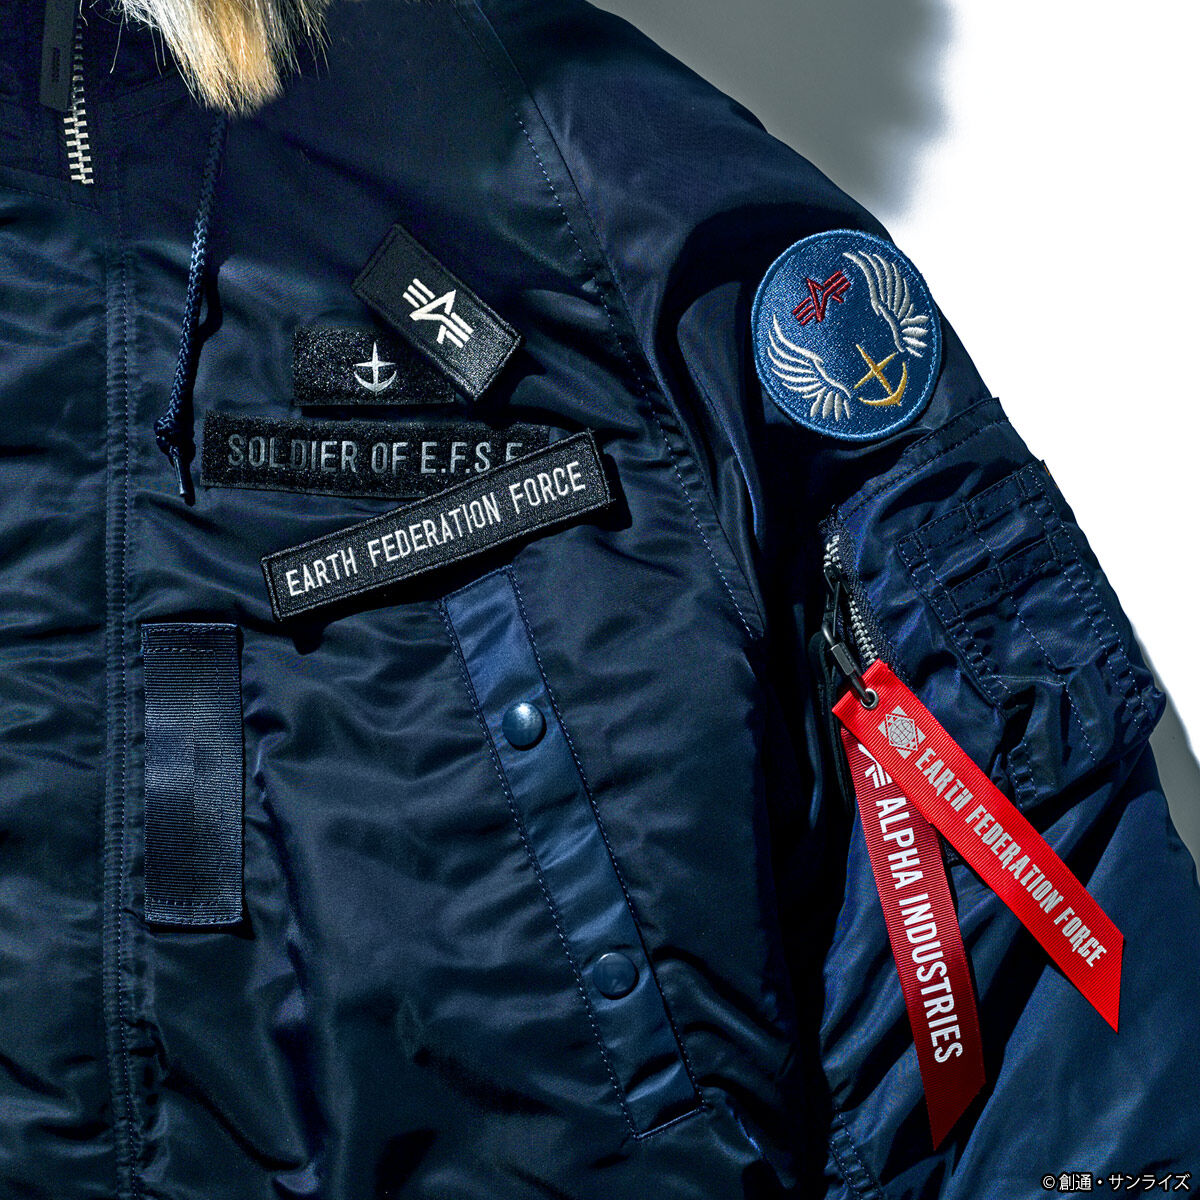 STRICT-G x ALPHA Mobile Suit Gundam Earth Federation Forces N-3B Jacket [July 2022 Delivery]